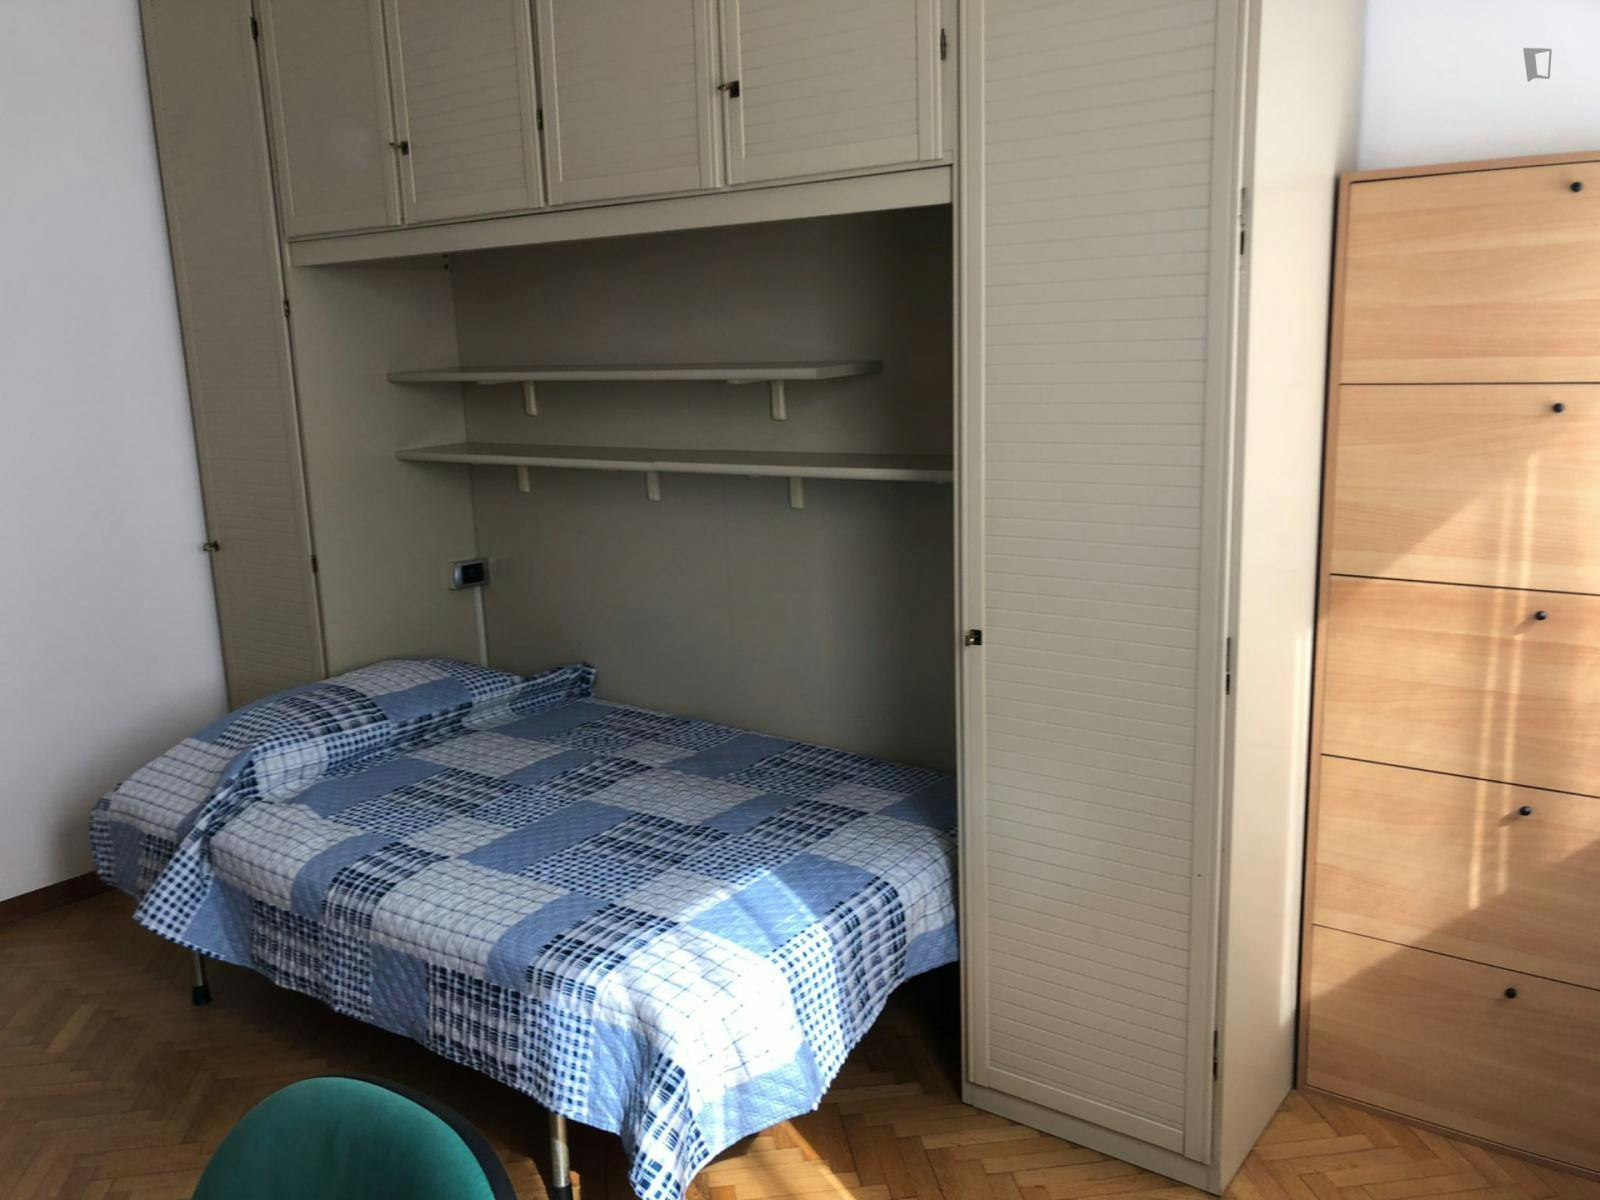 Homely single bedroom close to Polo Chimico Biomedico